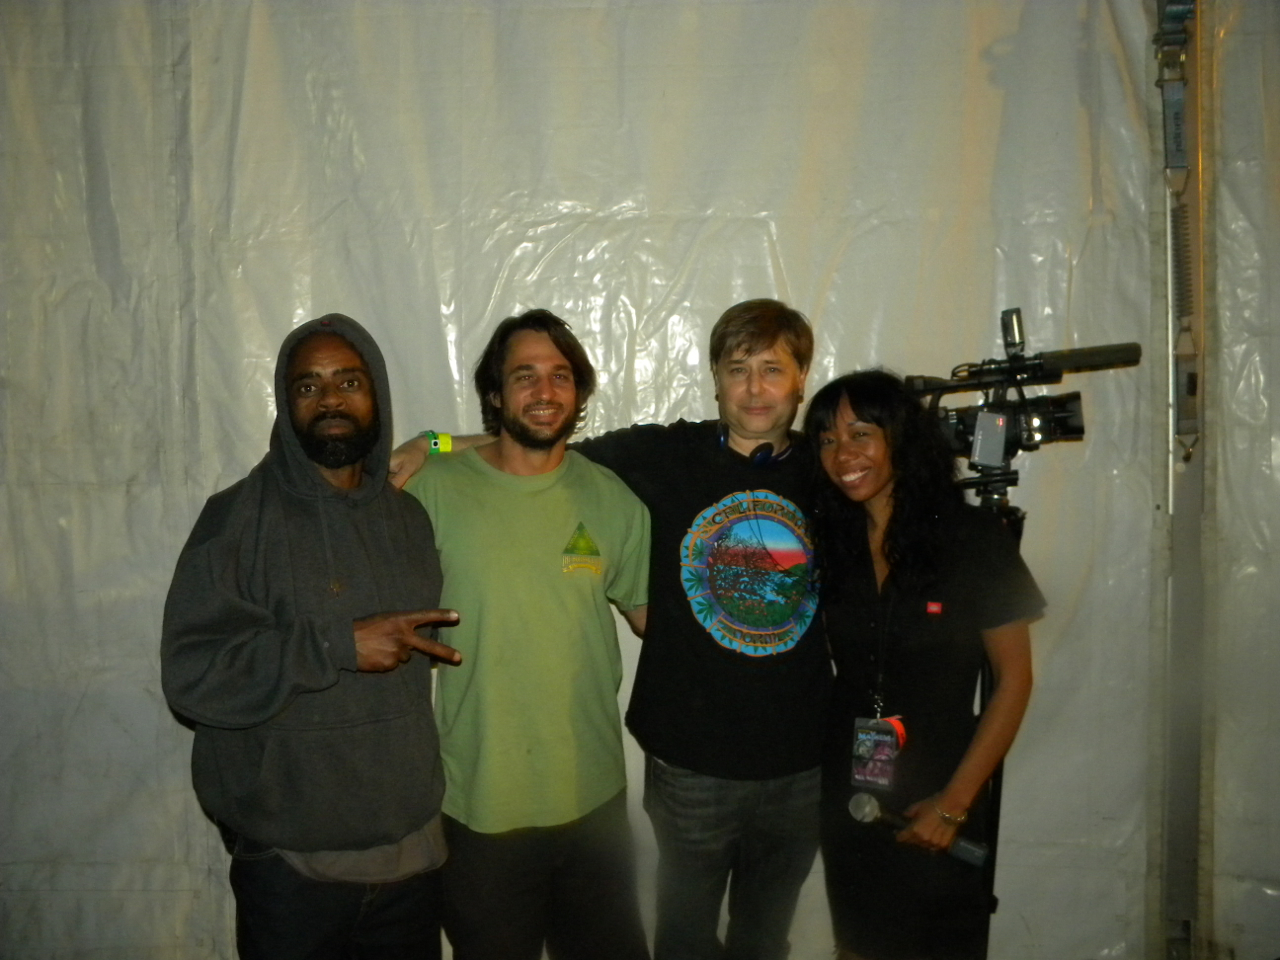 Freeway Ricky Ross, Jon Loomis, Kevin Booth, Mary Taylor filming Slipnot concert for How Weed Won the West